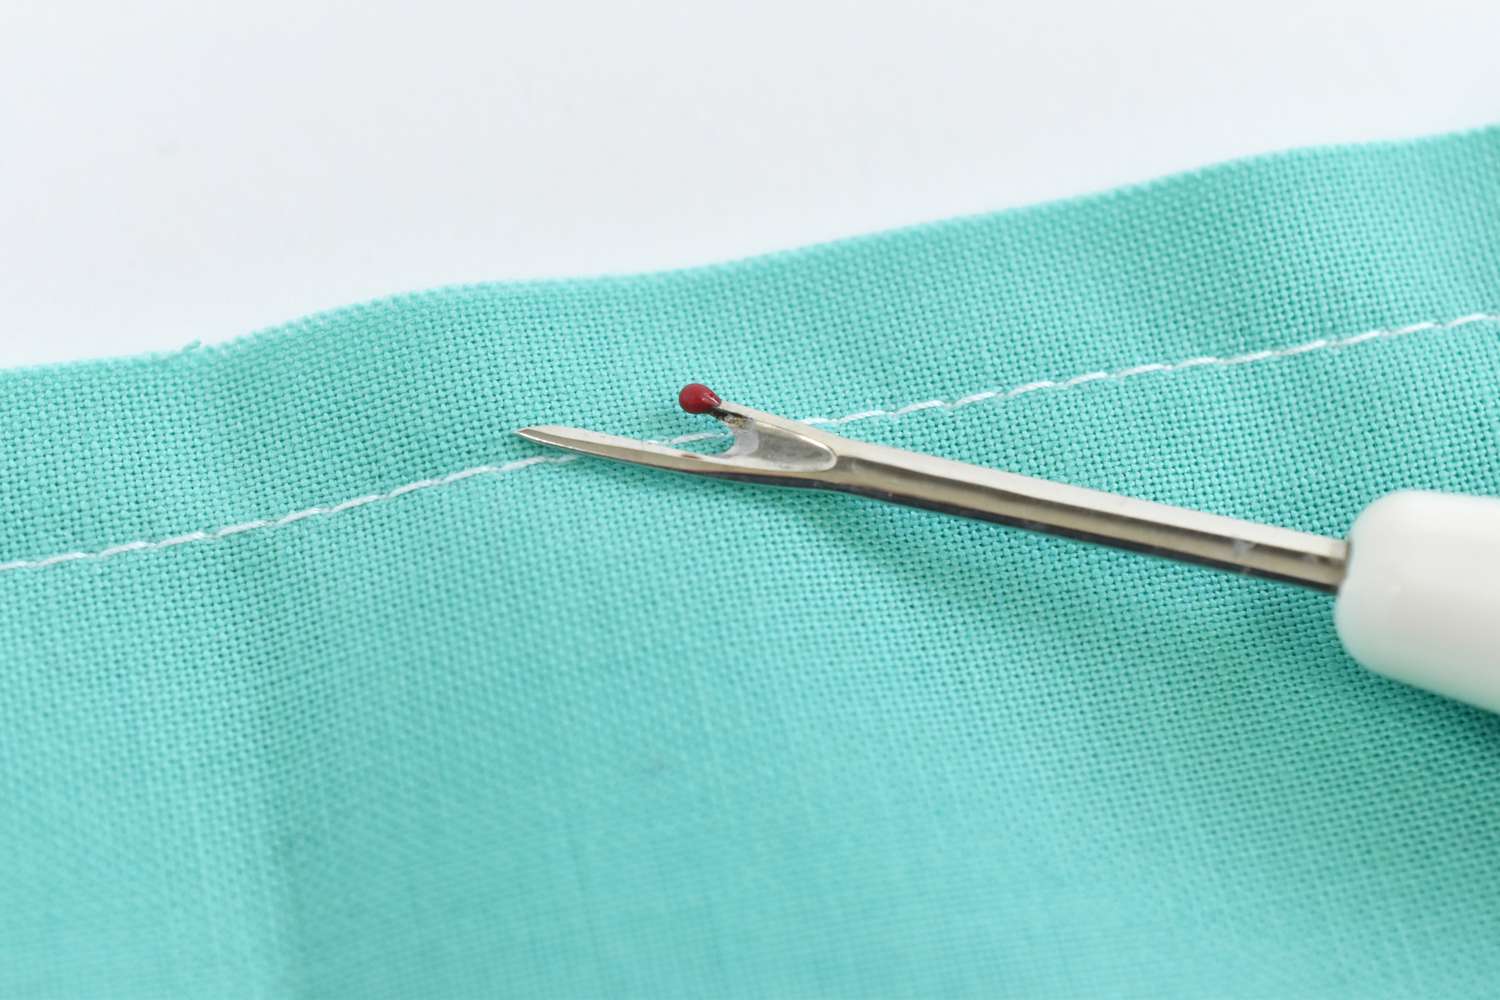 How to Remove and Replace Sewing Stitches